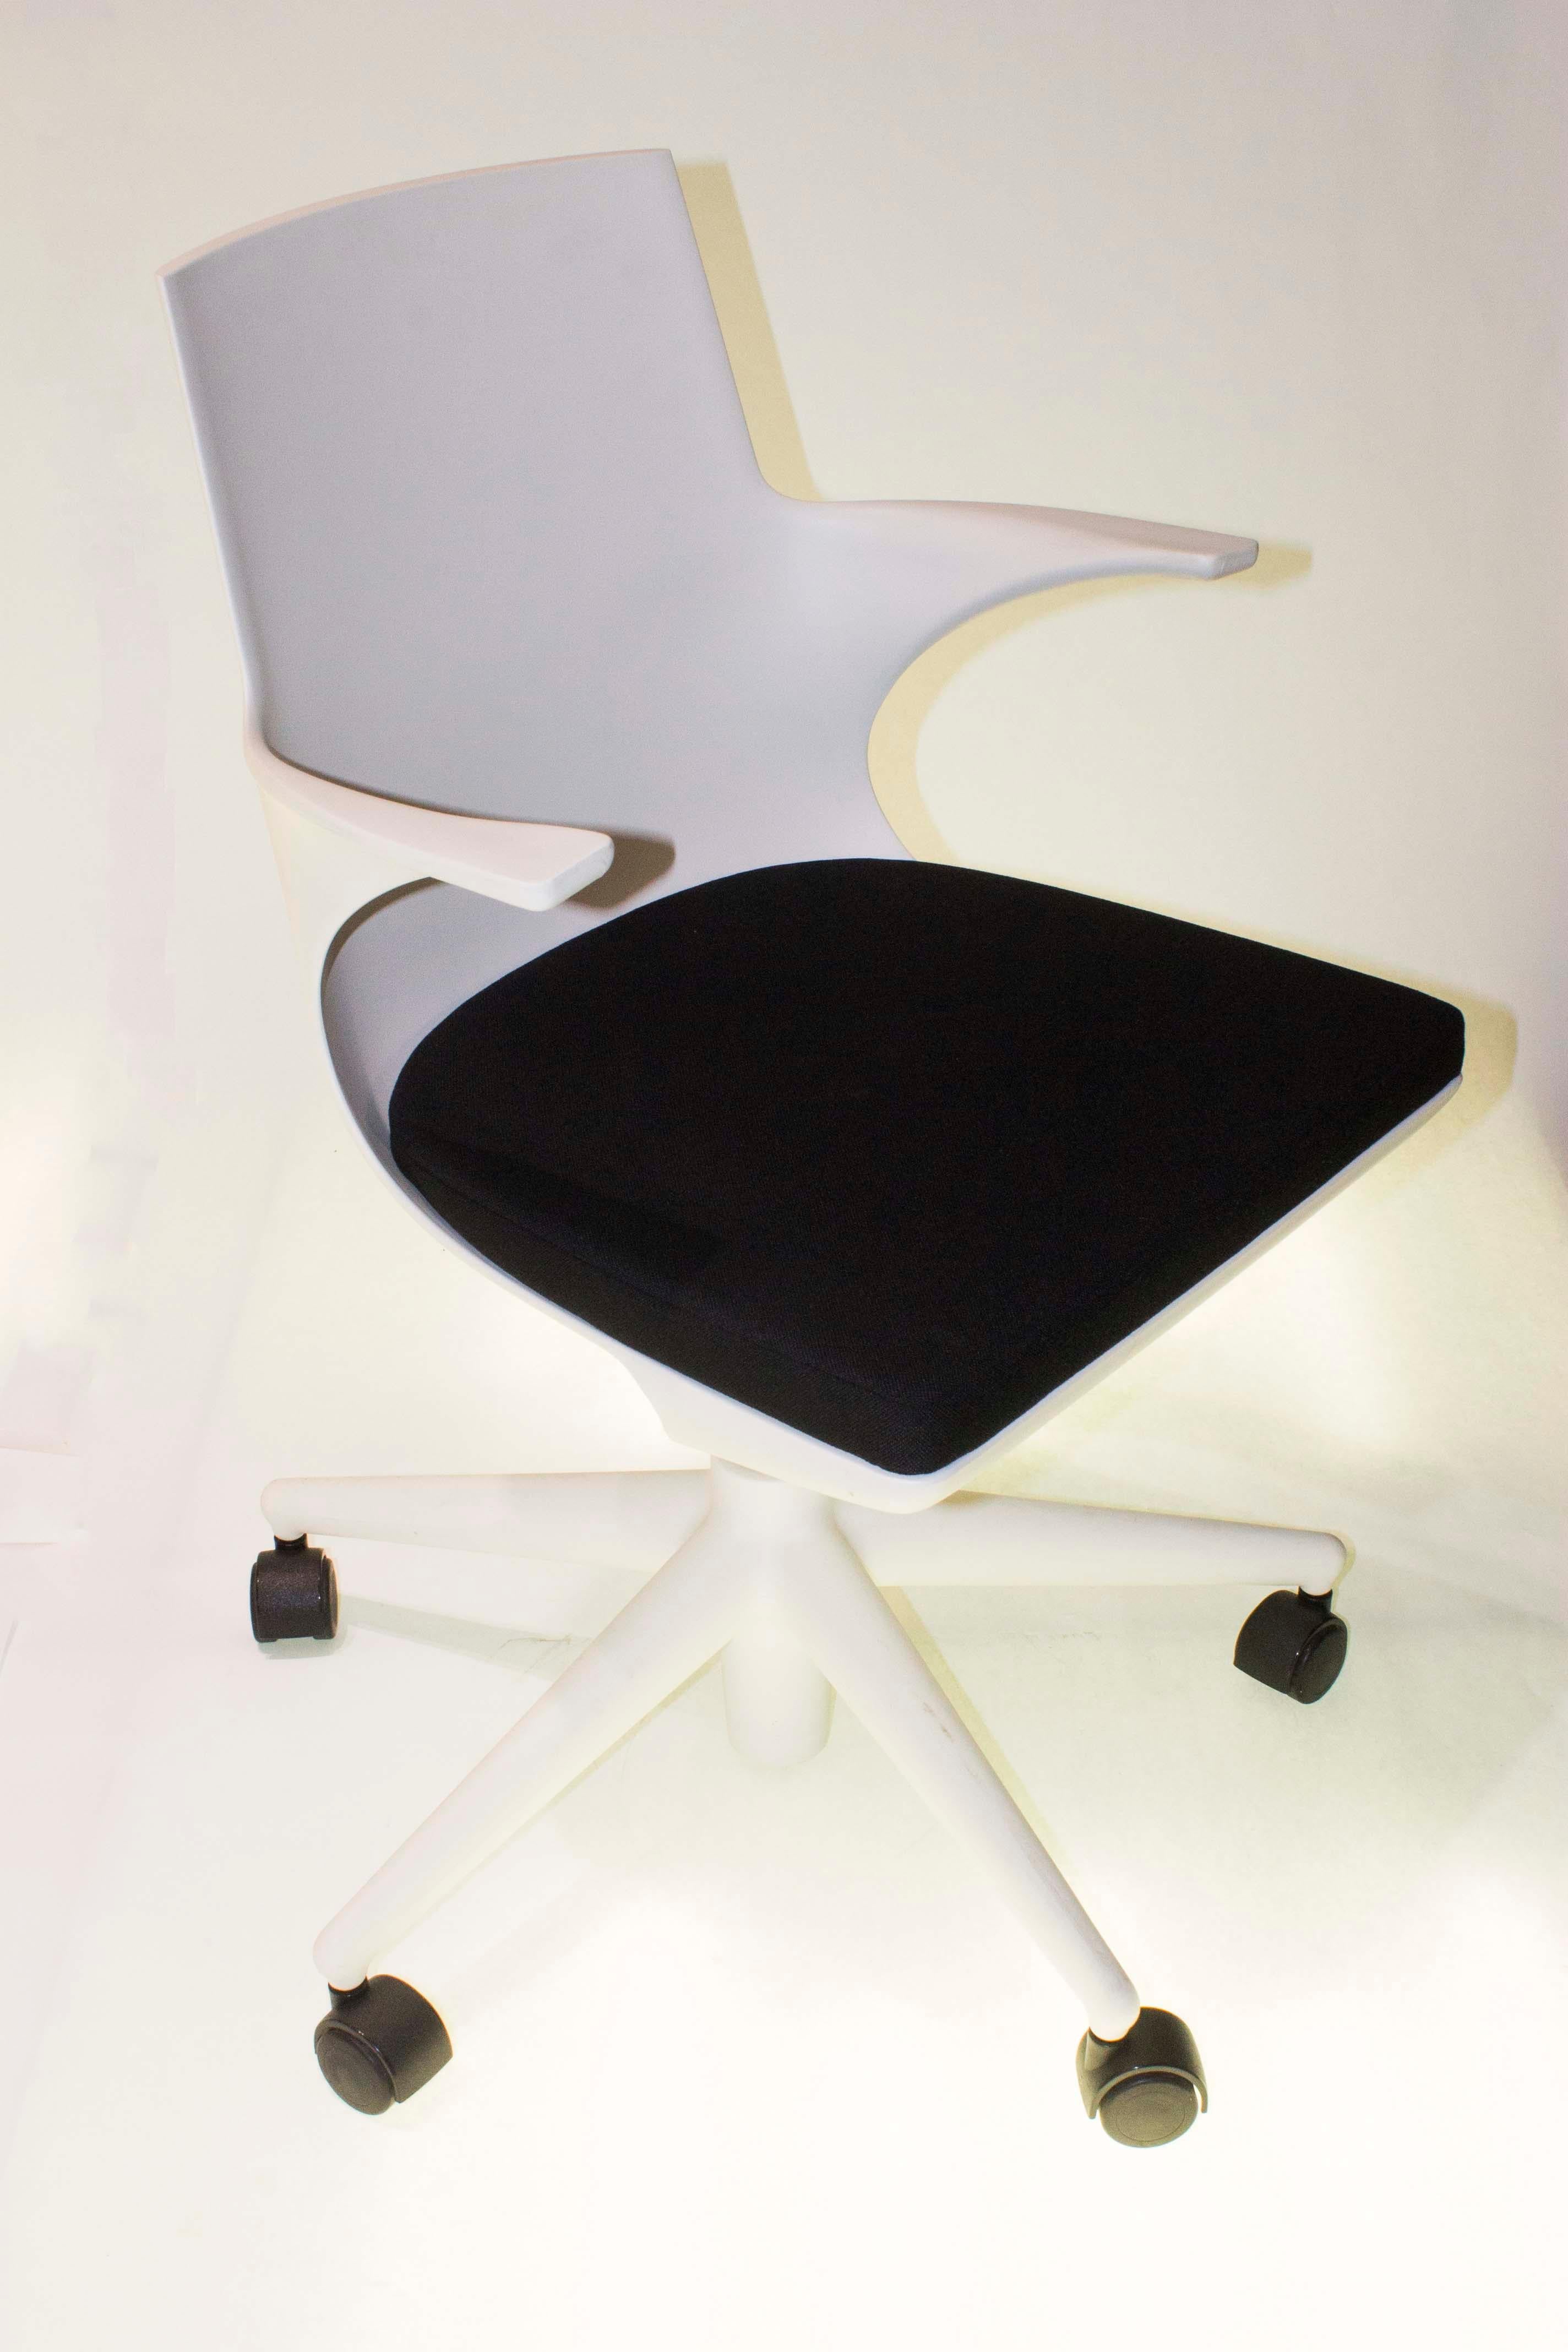 A monoshell light office chair on castors, spoon chair is the result of a totally avant-garde production process. The innovative dual-component injection moulding technology used to produce this chair creates a “layered” product. Two different